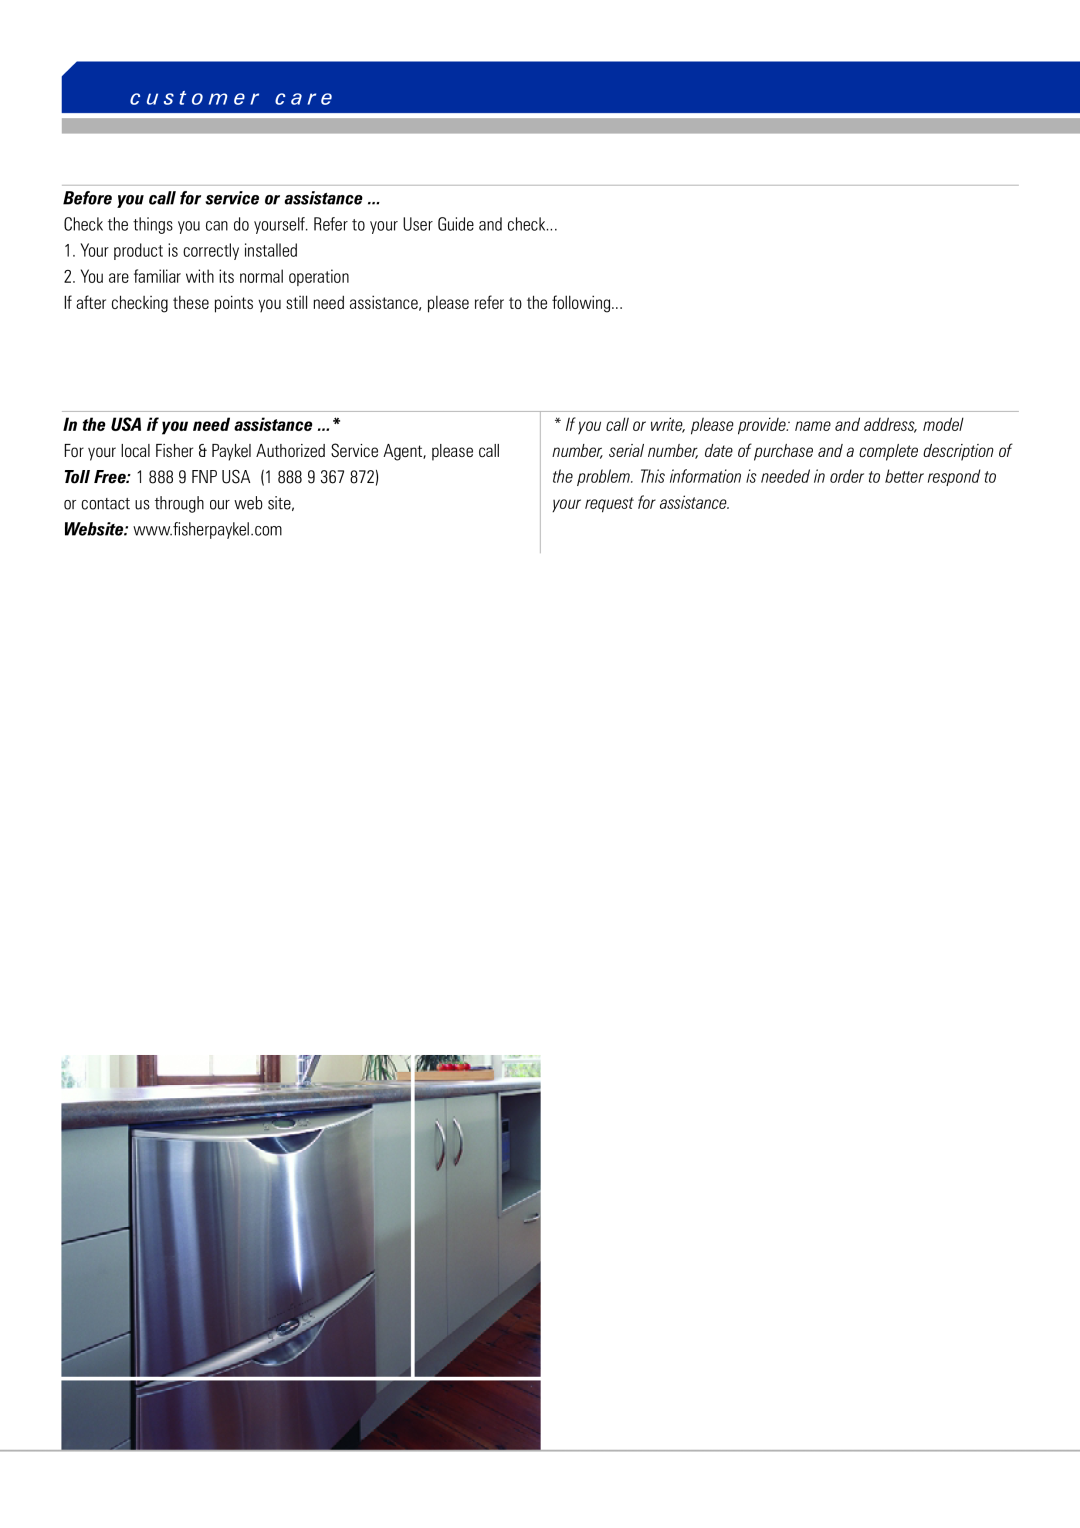 Fisher & Paykel DD603 manual c u s t o m e r c a r e, Before you call for service or assistance 